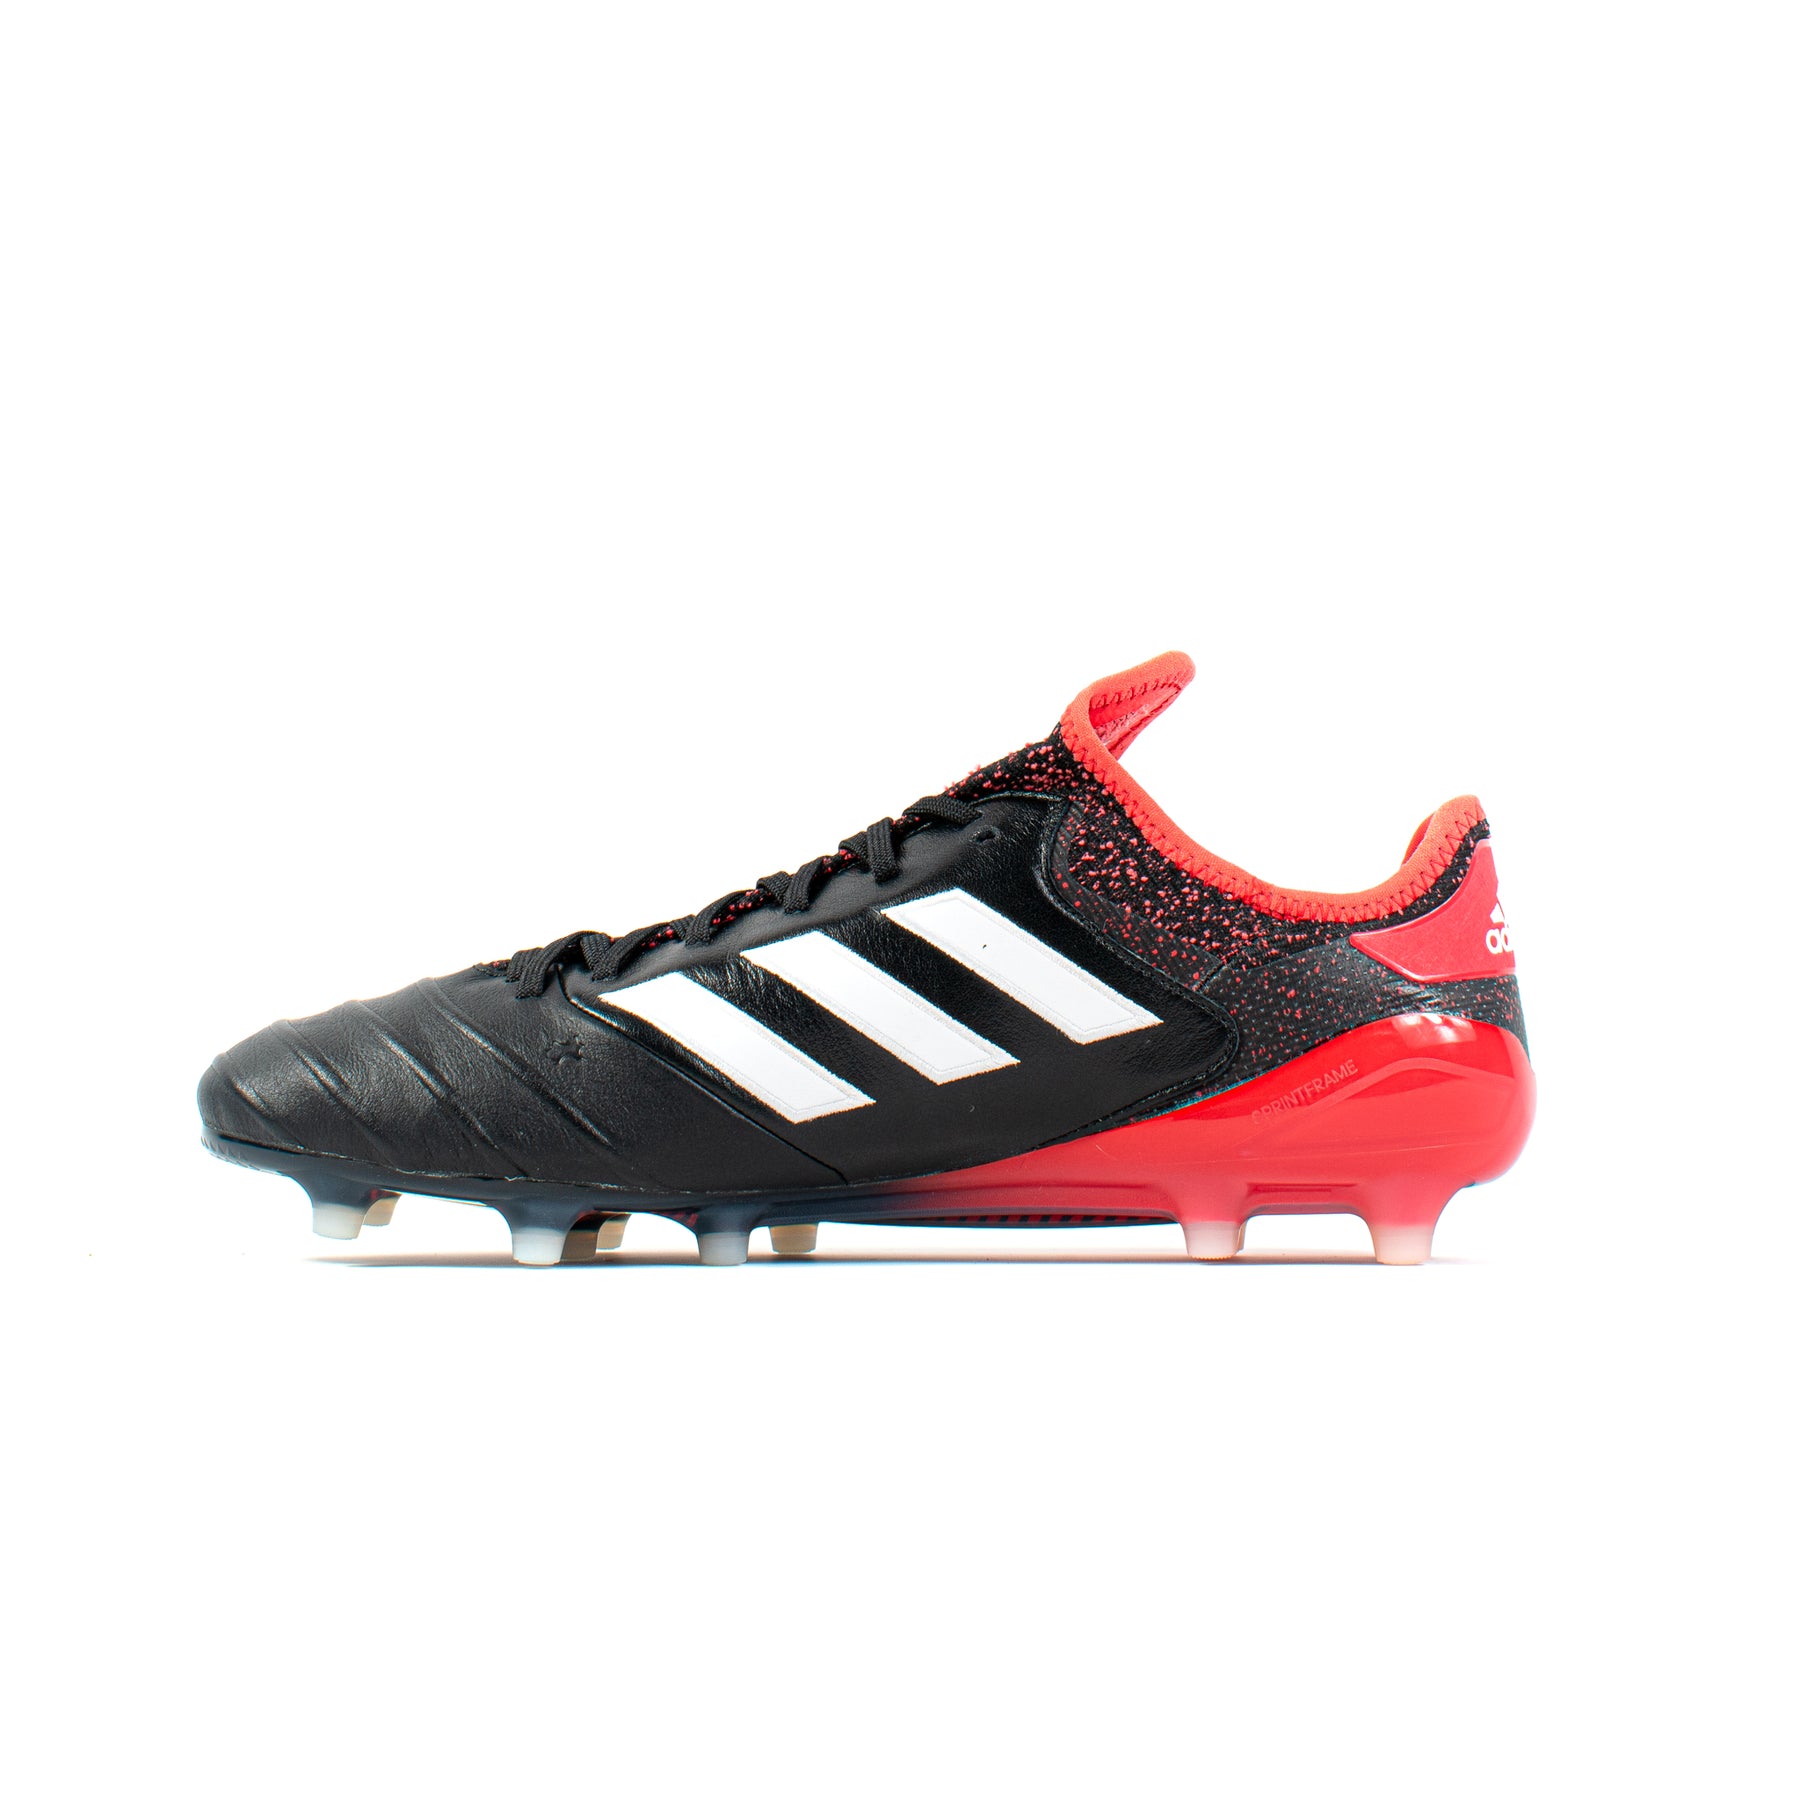 Adidas Red FG – Classic Soccer Cleats